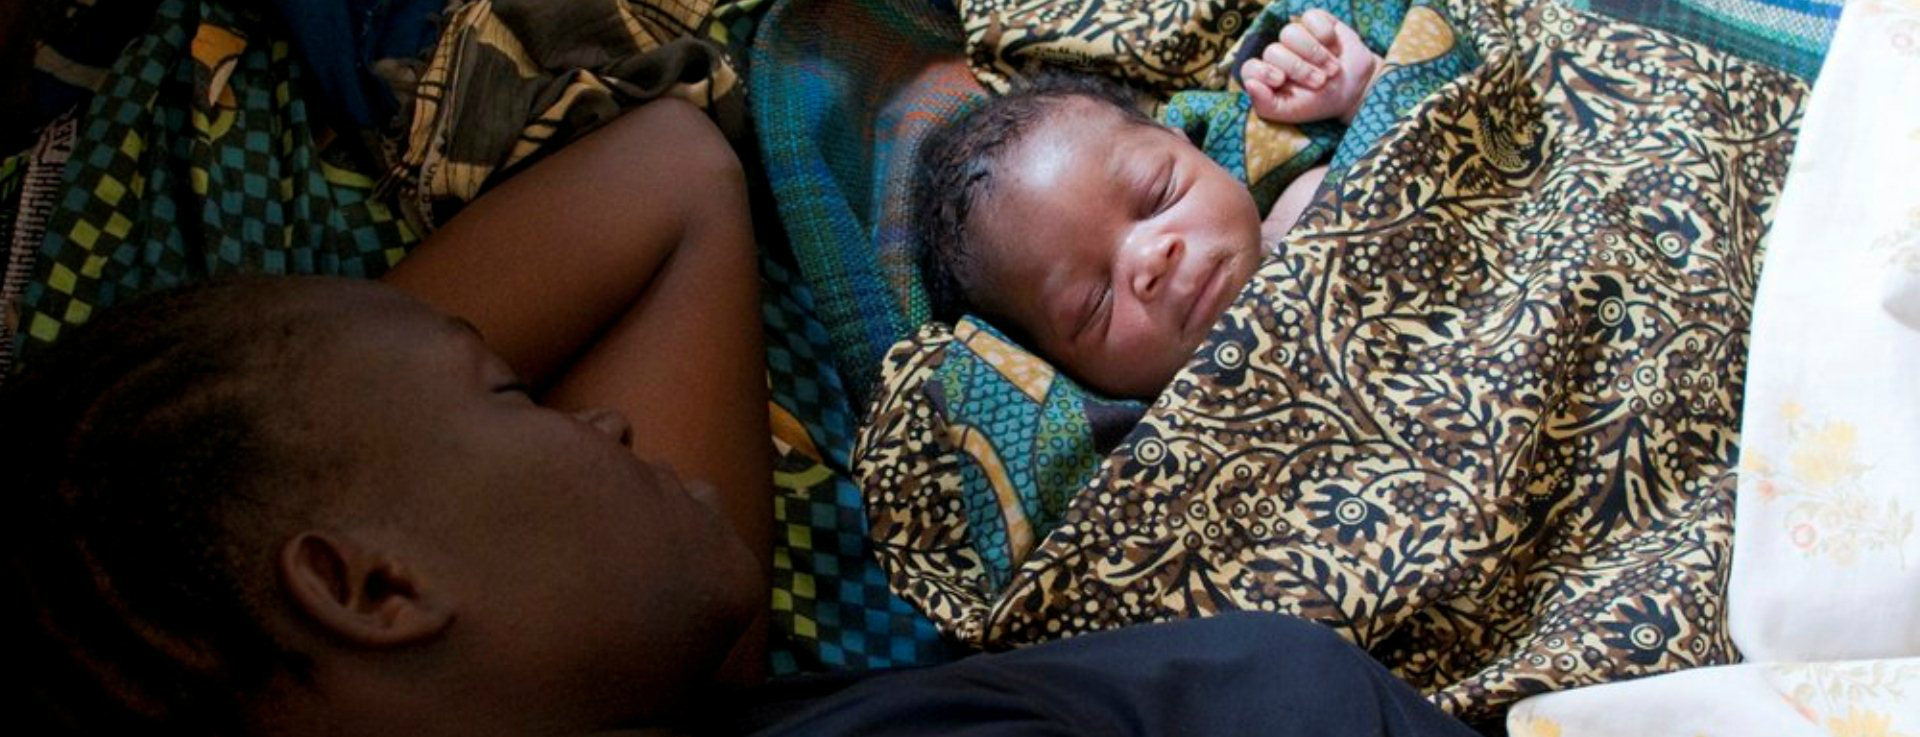 Safe birth – nearly half a millon women and newborn babies lose their lives to infections every year